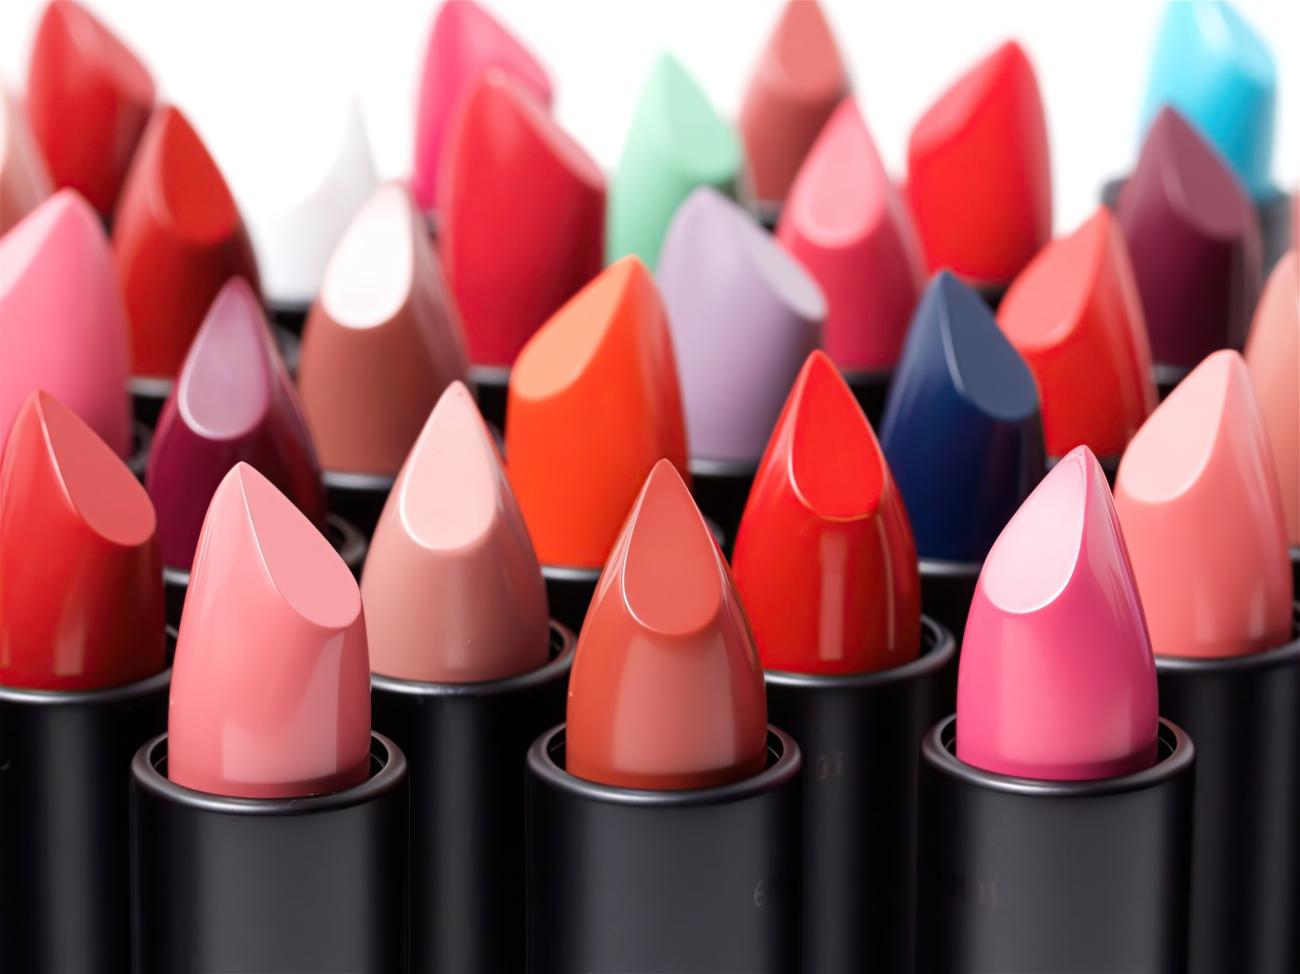 uncapped lipsticks in a variety of colors